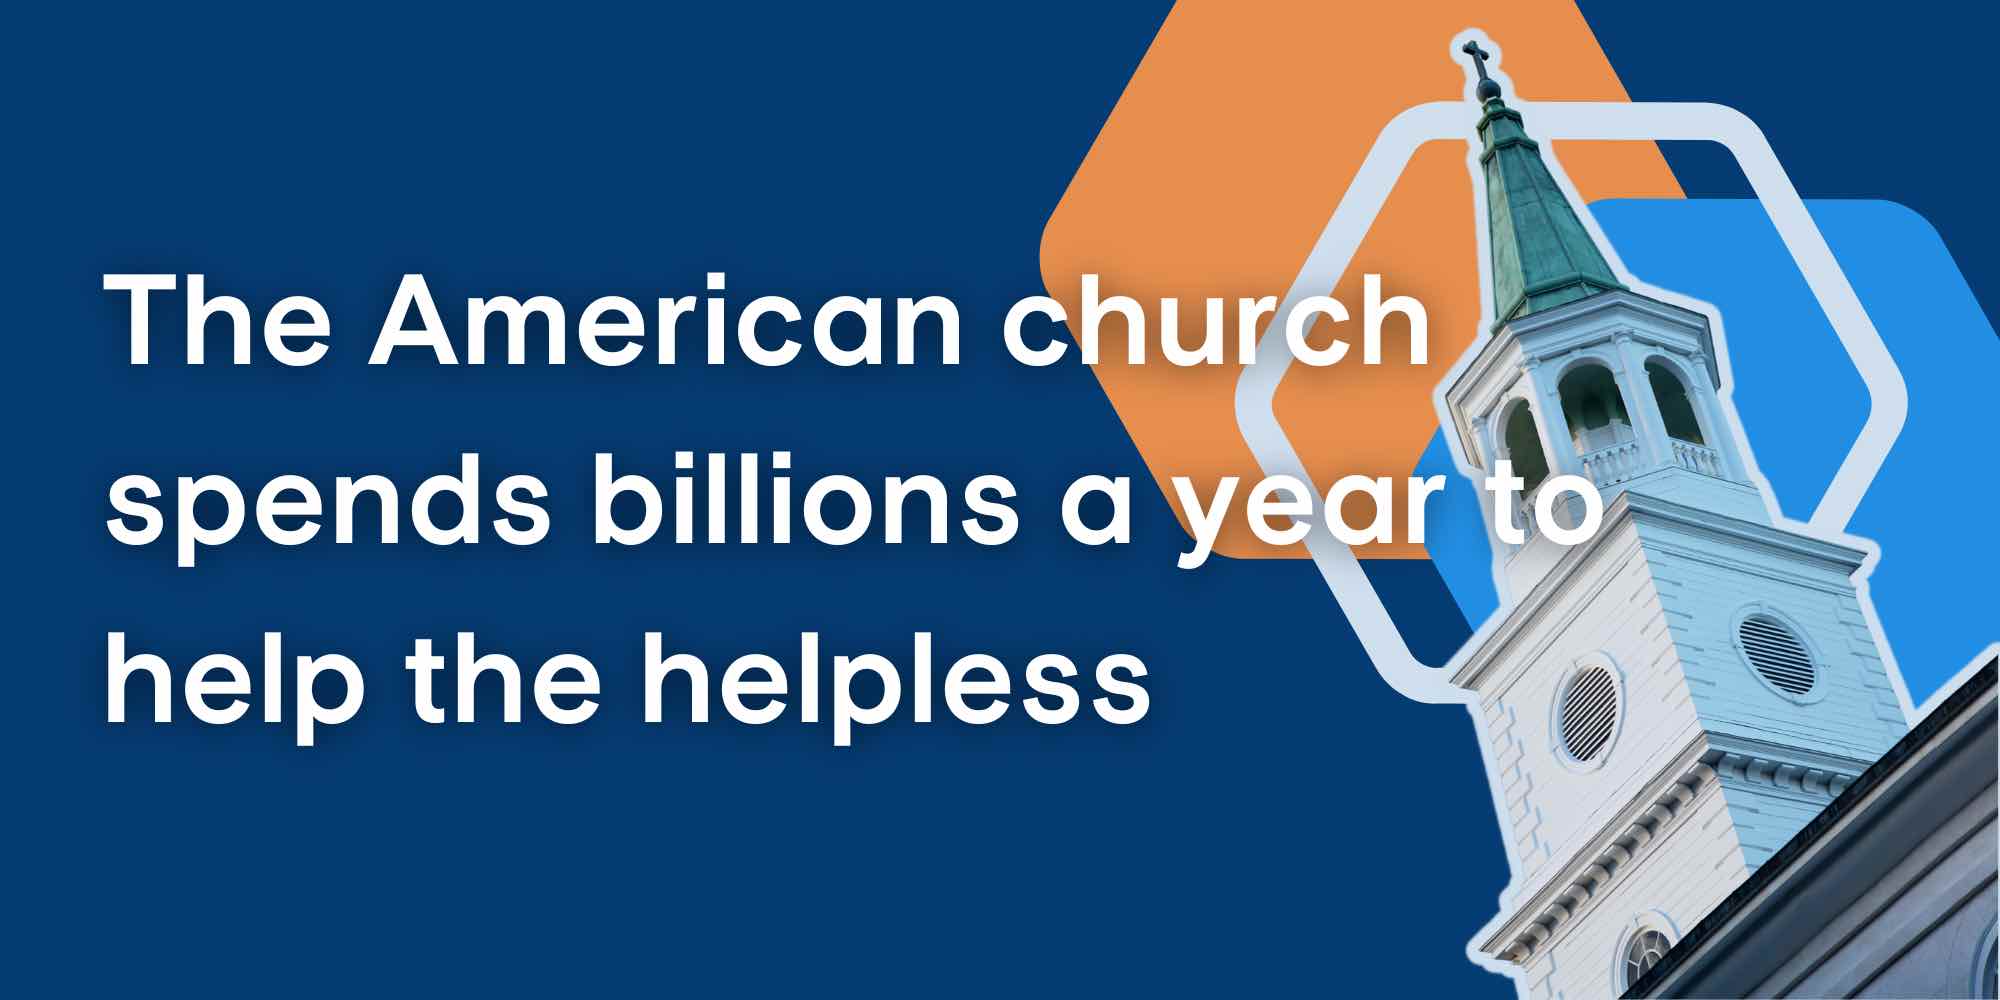 The American church puts billions of dollars toward helping others every year